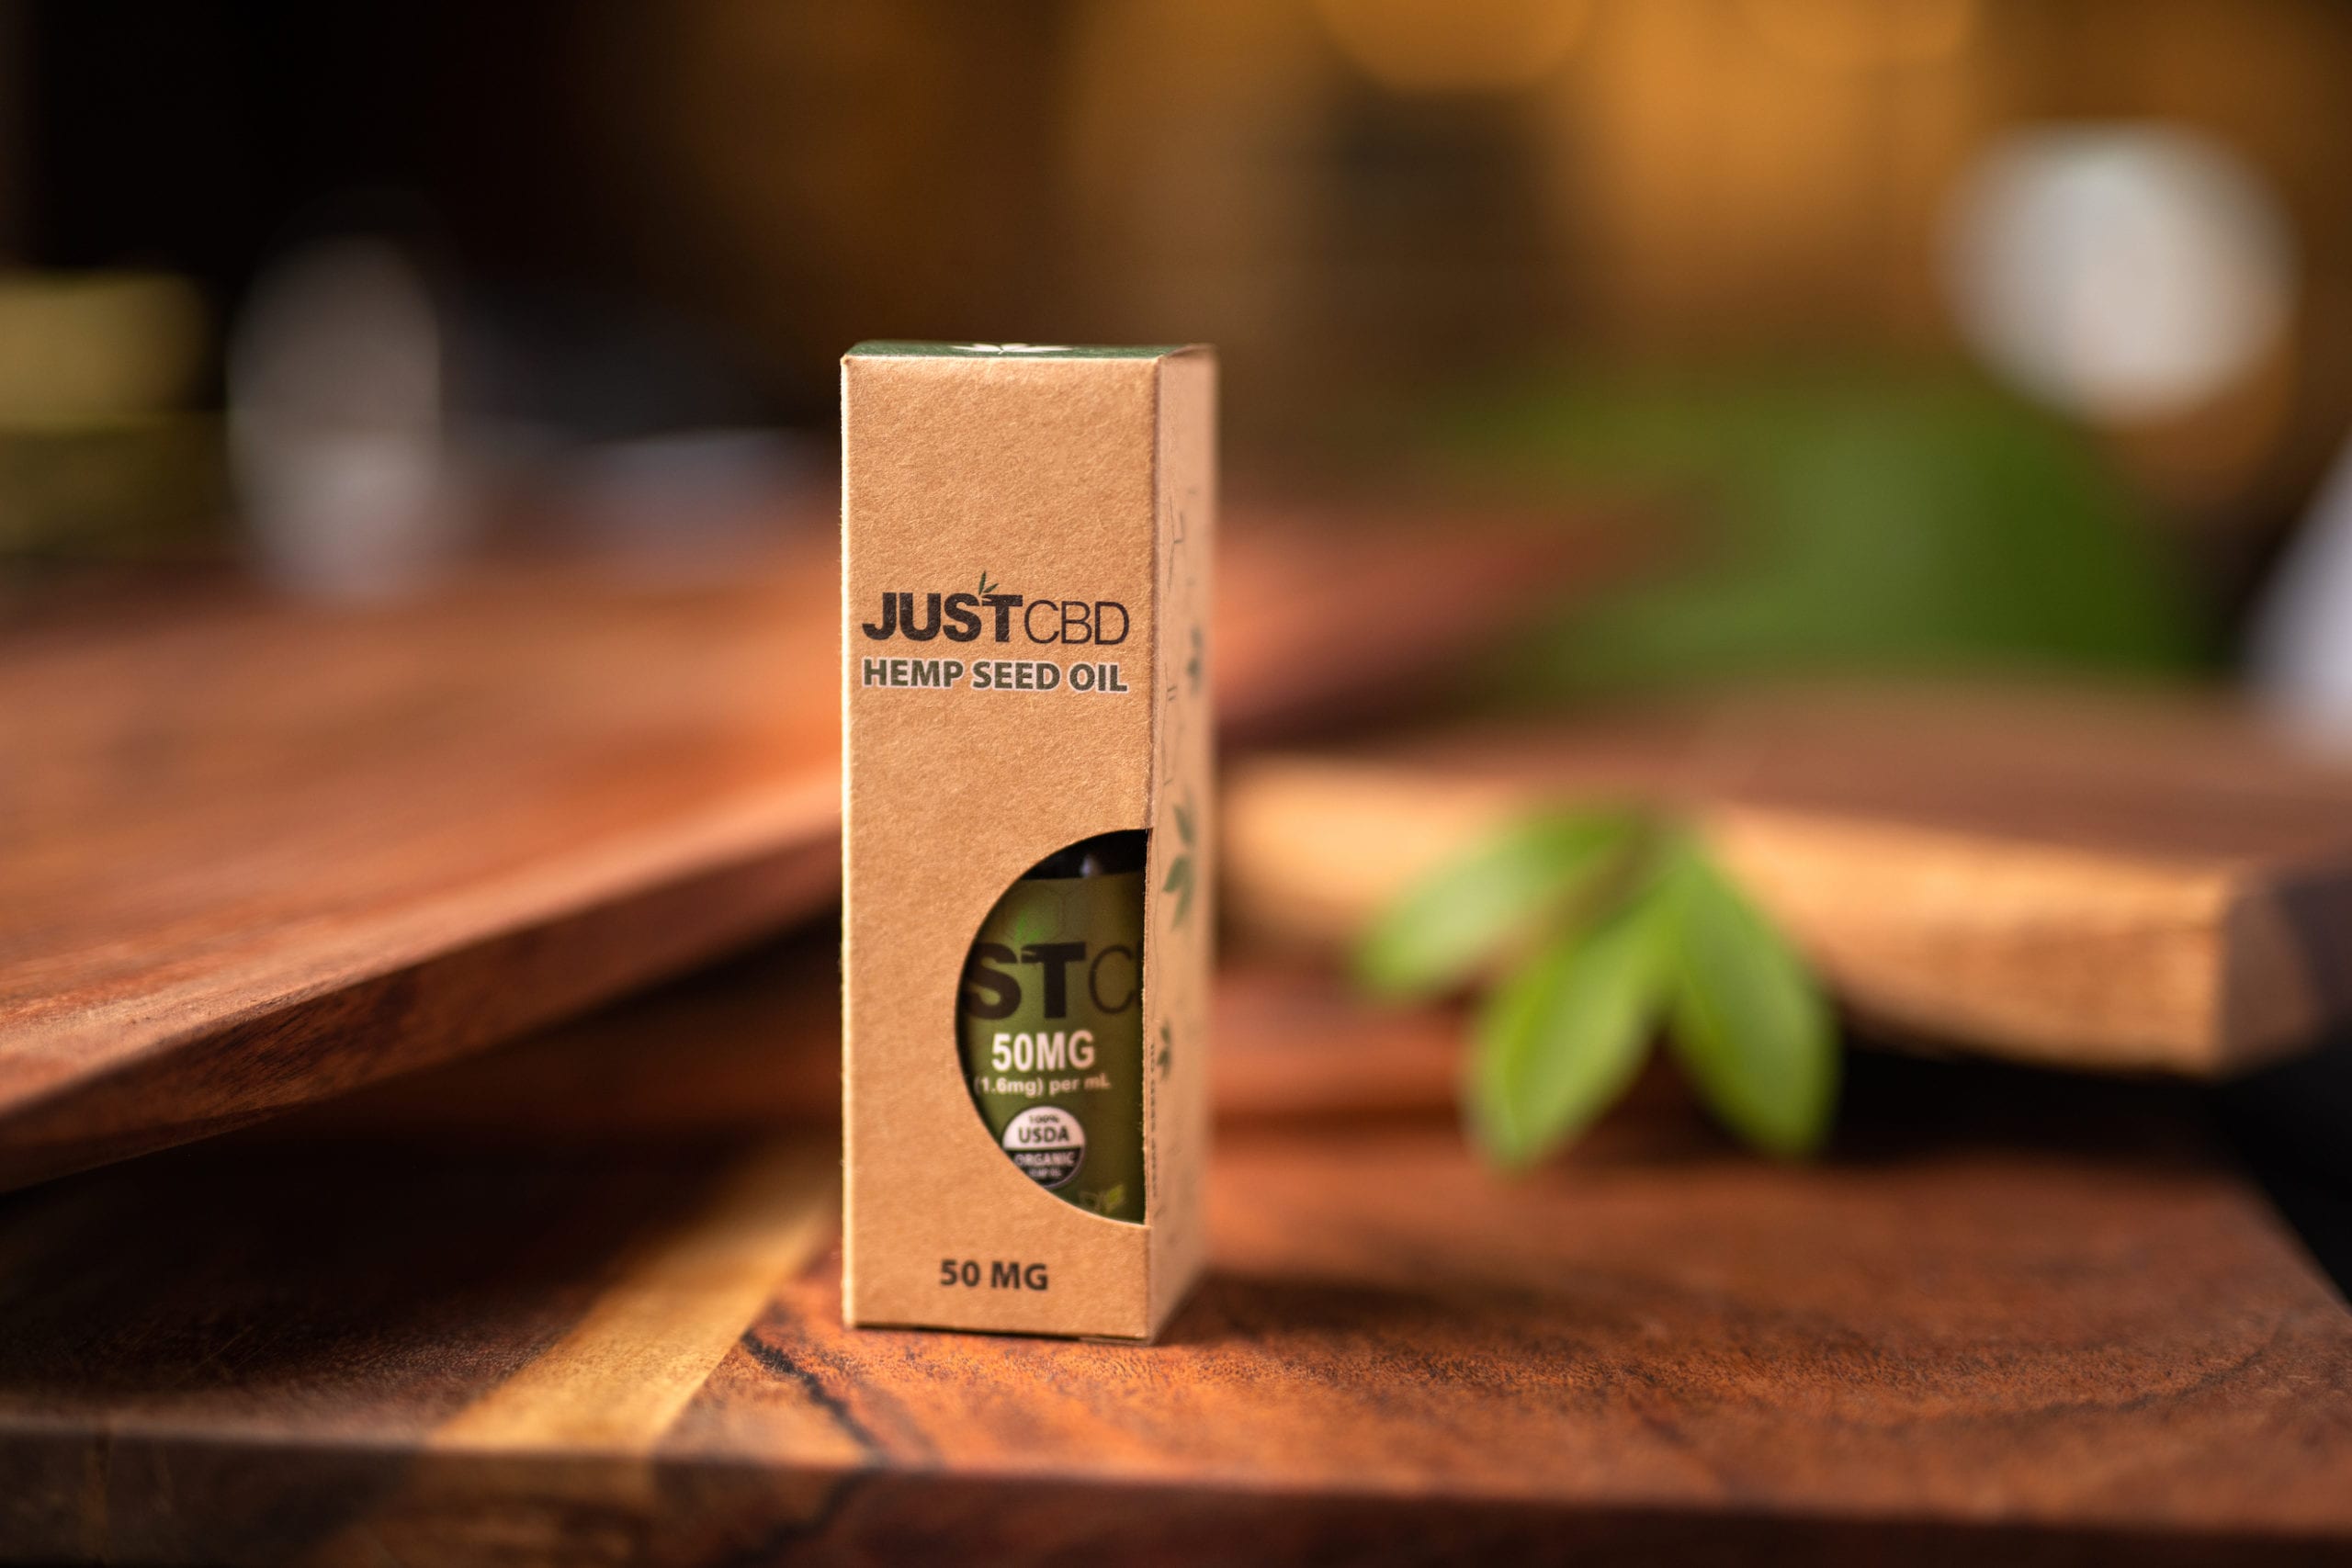 JustCBD Product Photography and JustCBD Products